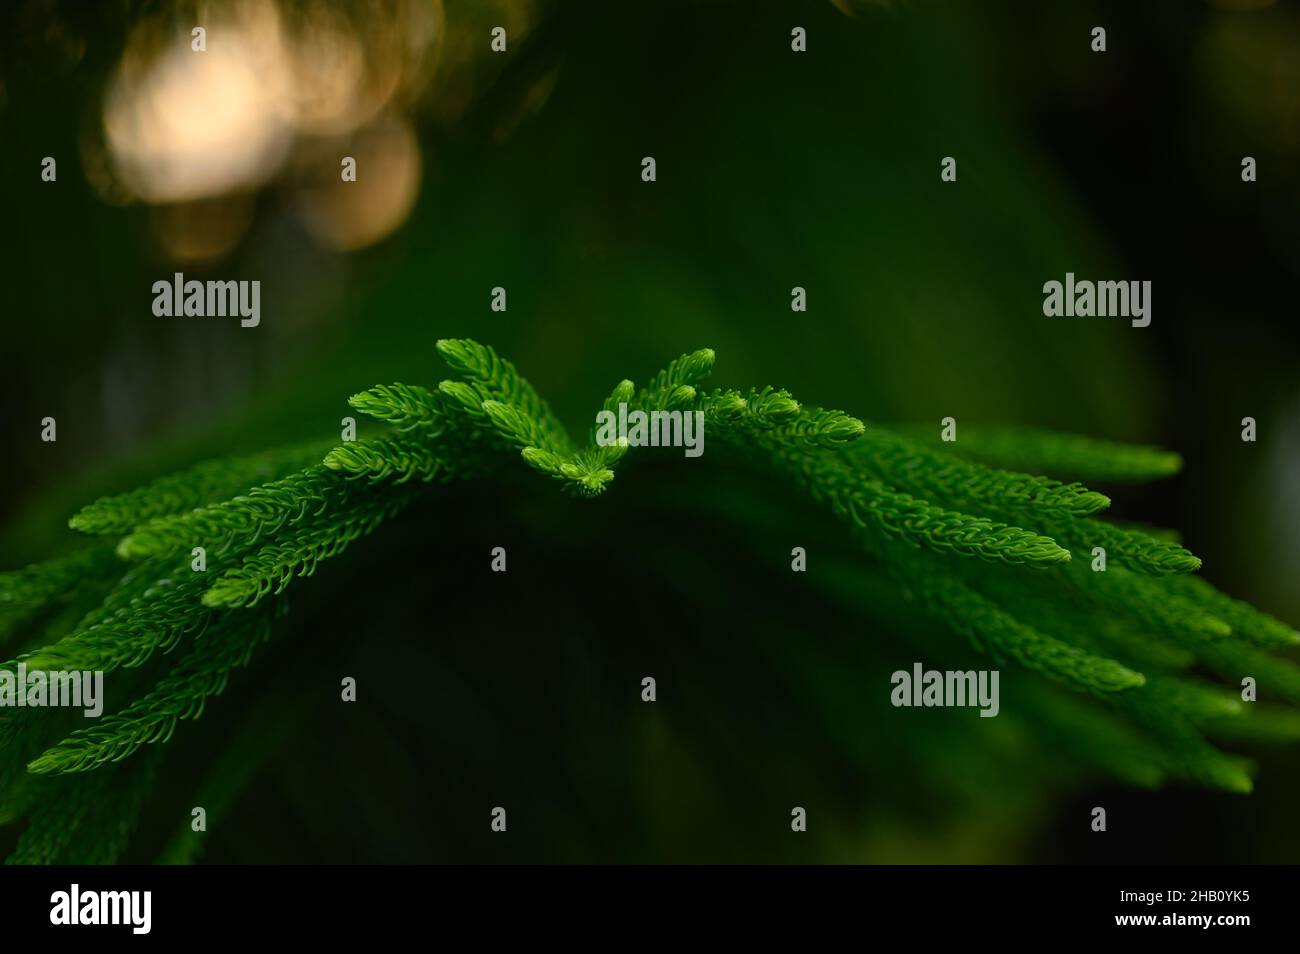 Photo shows an evergreen araucaria tree. Picture was made in the garden of Dominican Republic. Coniferous tree was photographed in close-up and needle Stock Photo